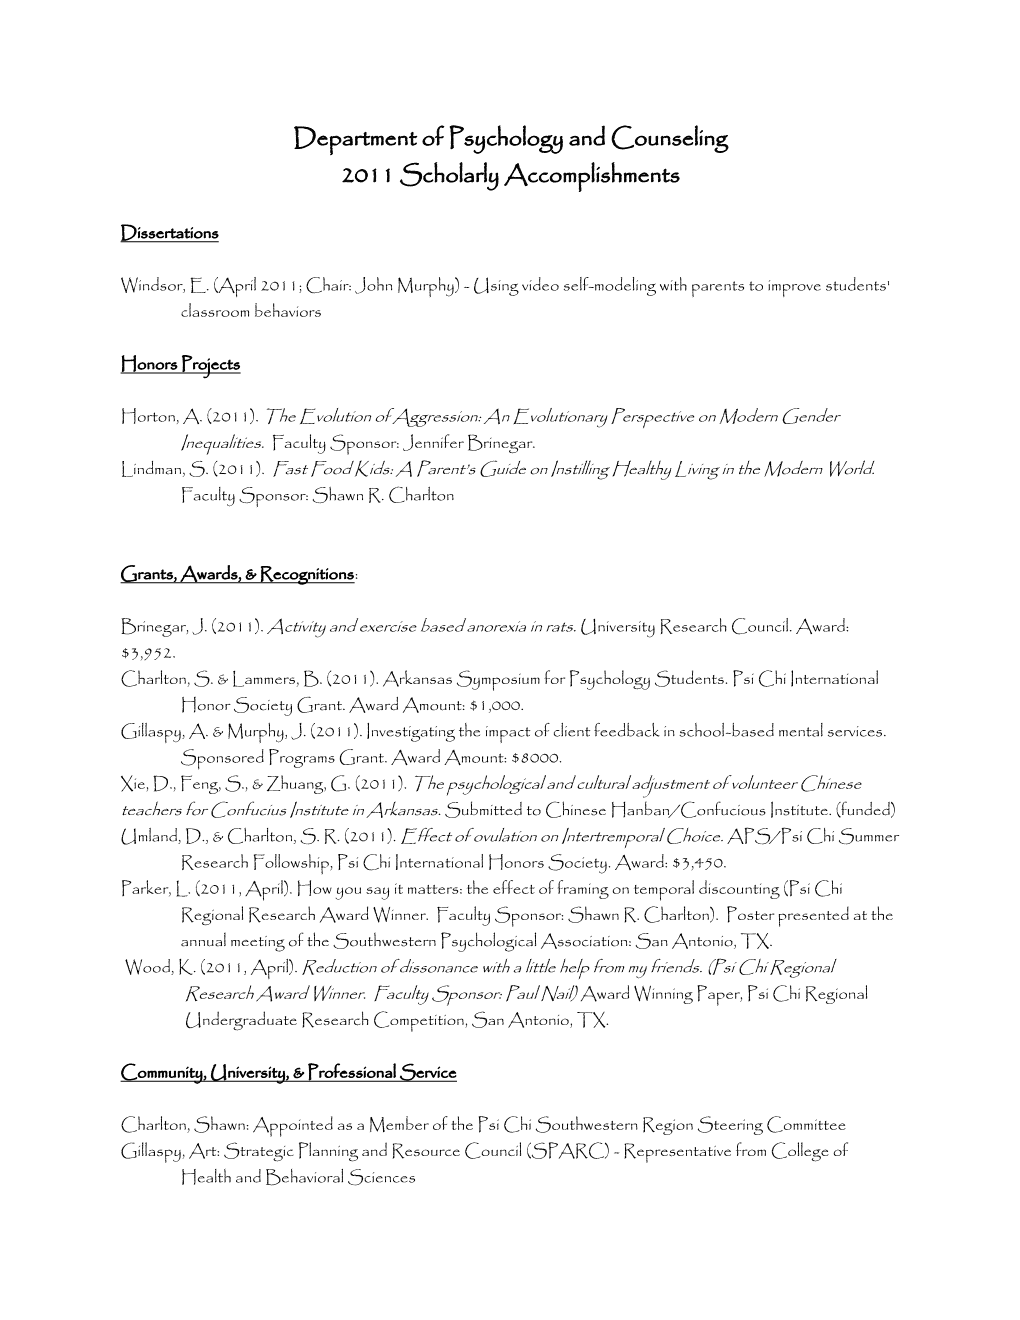 Department of Psychology and Counseling 2011 Scholarly Accomplishments